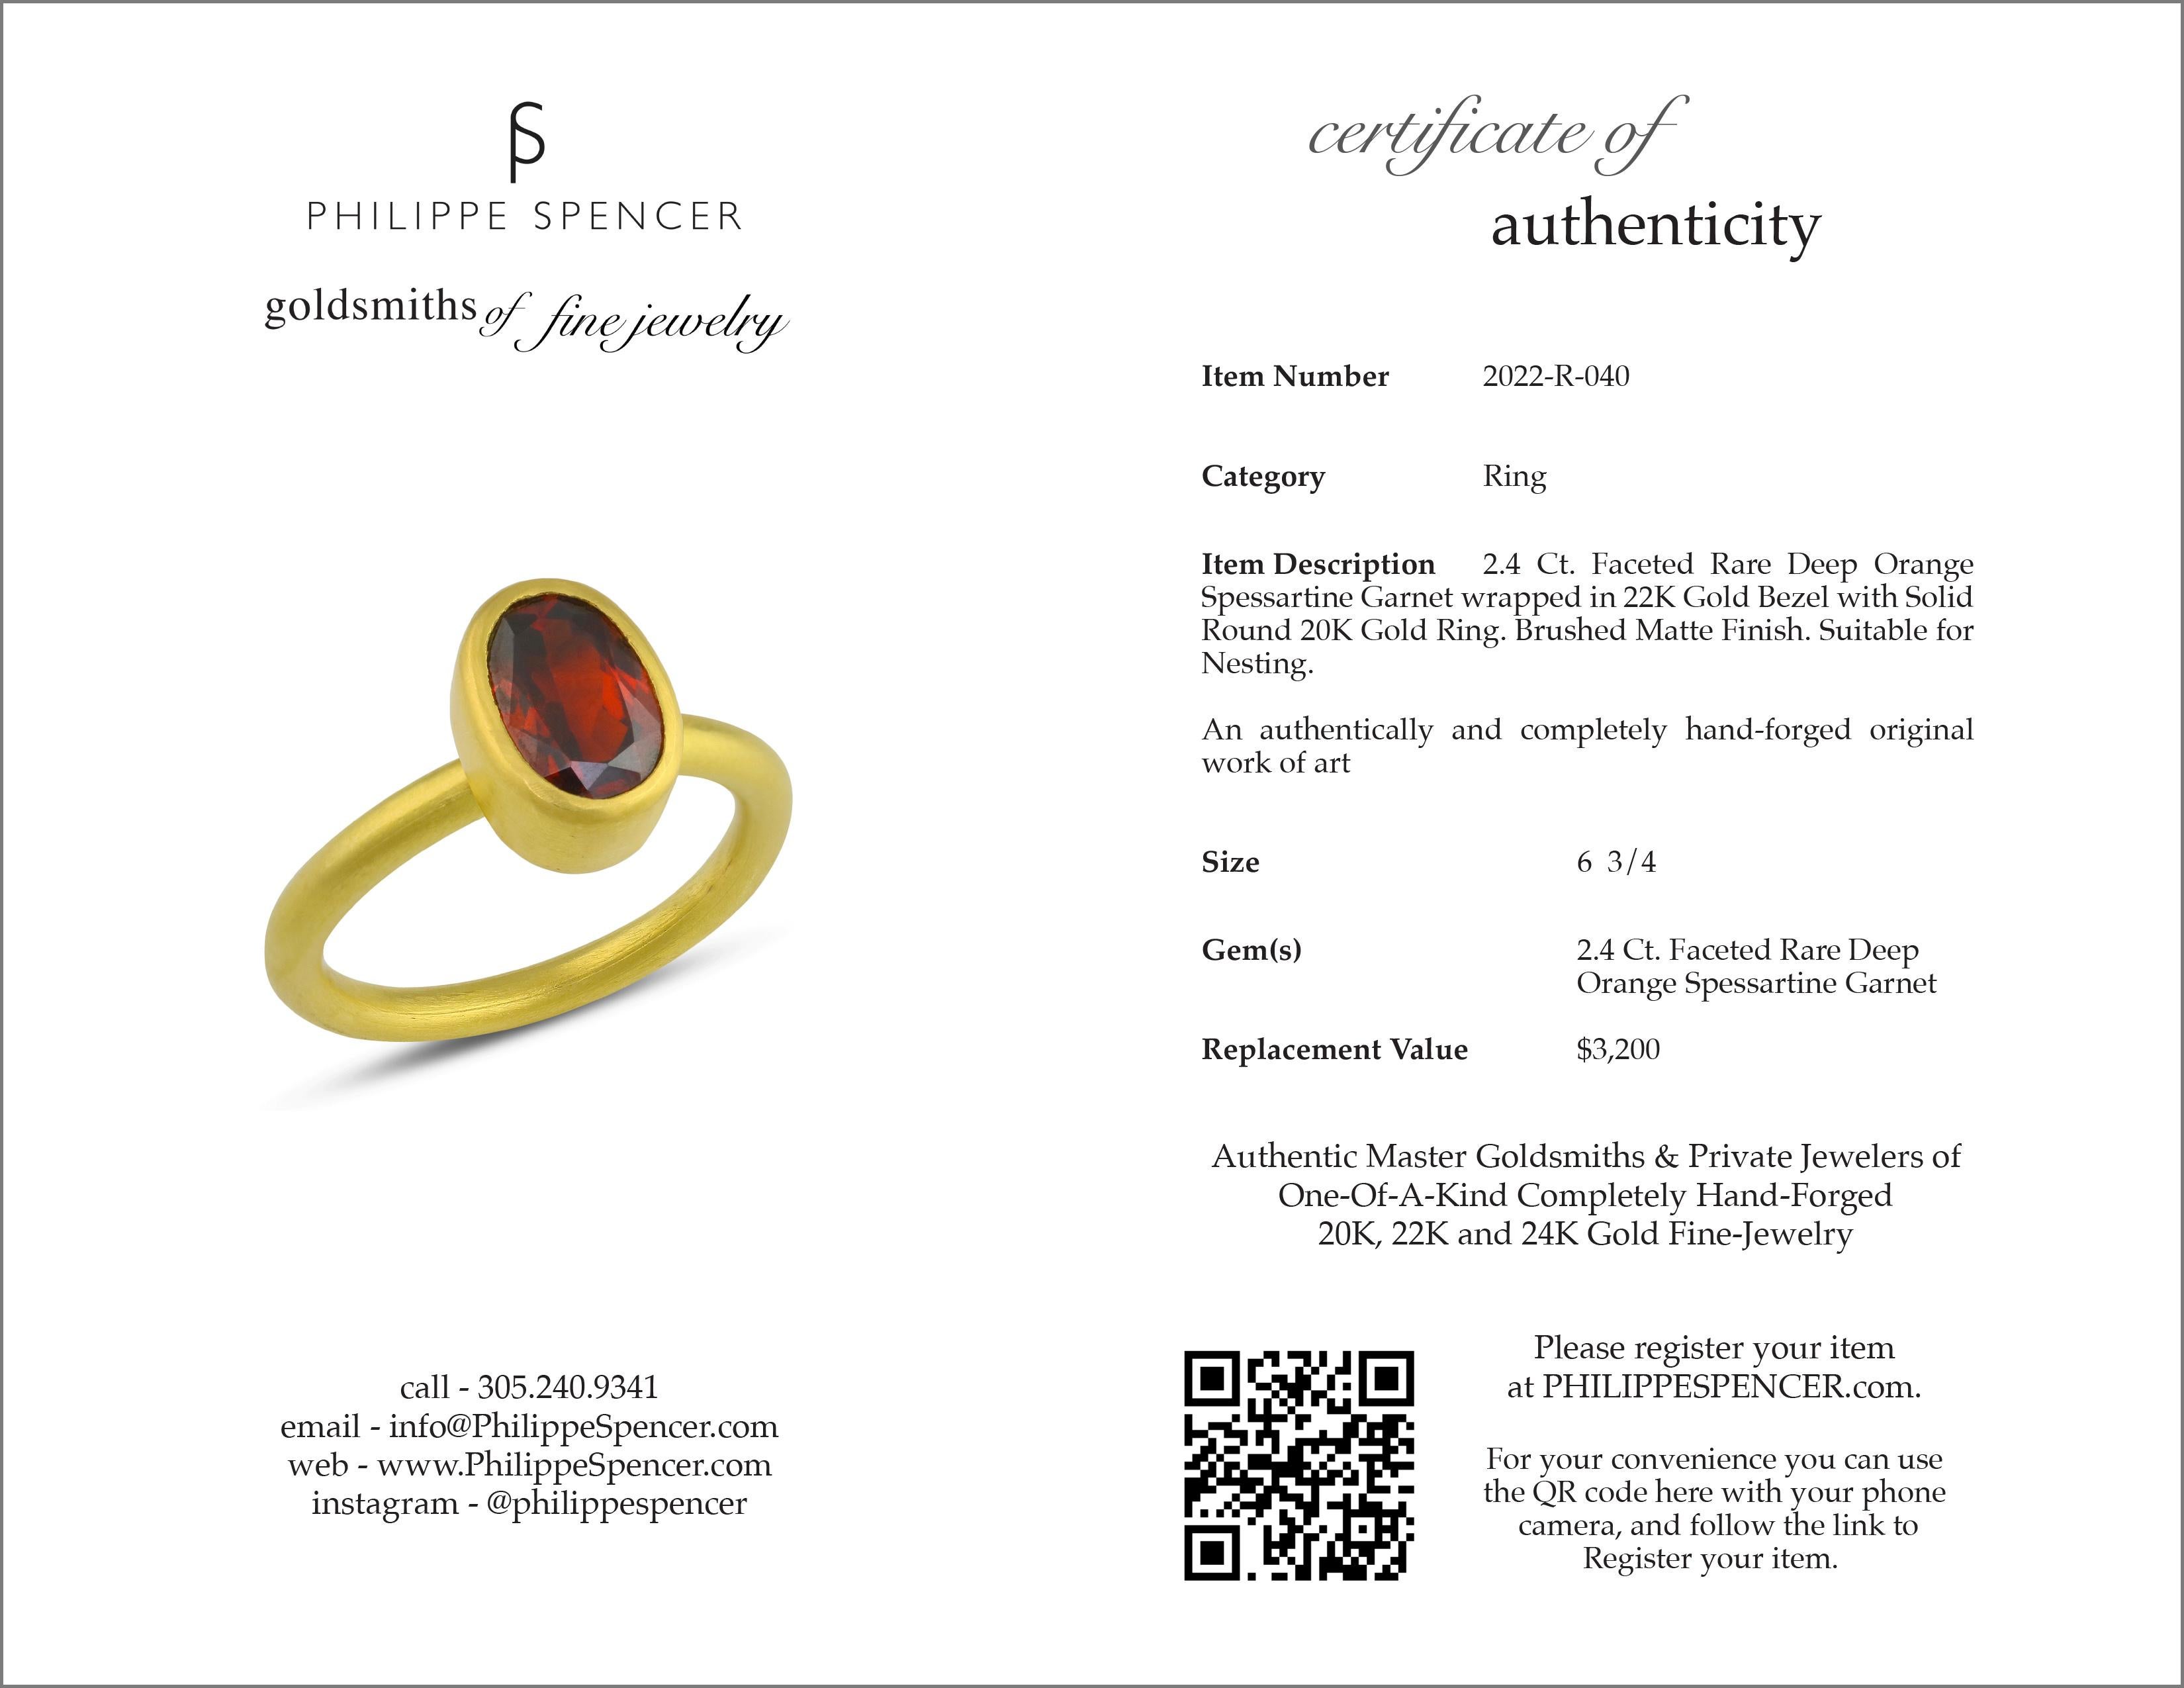 Oval Cut PHILIPPE SPENCER 2.4 Ct. Spessartine in 22K and 20K Gold Solitaire Ring